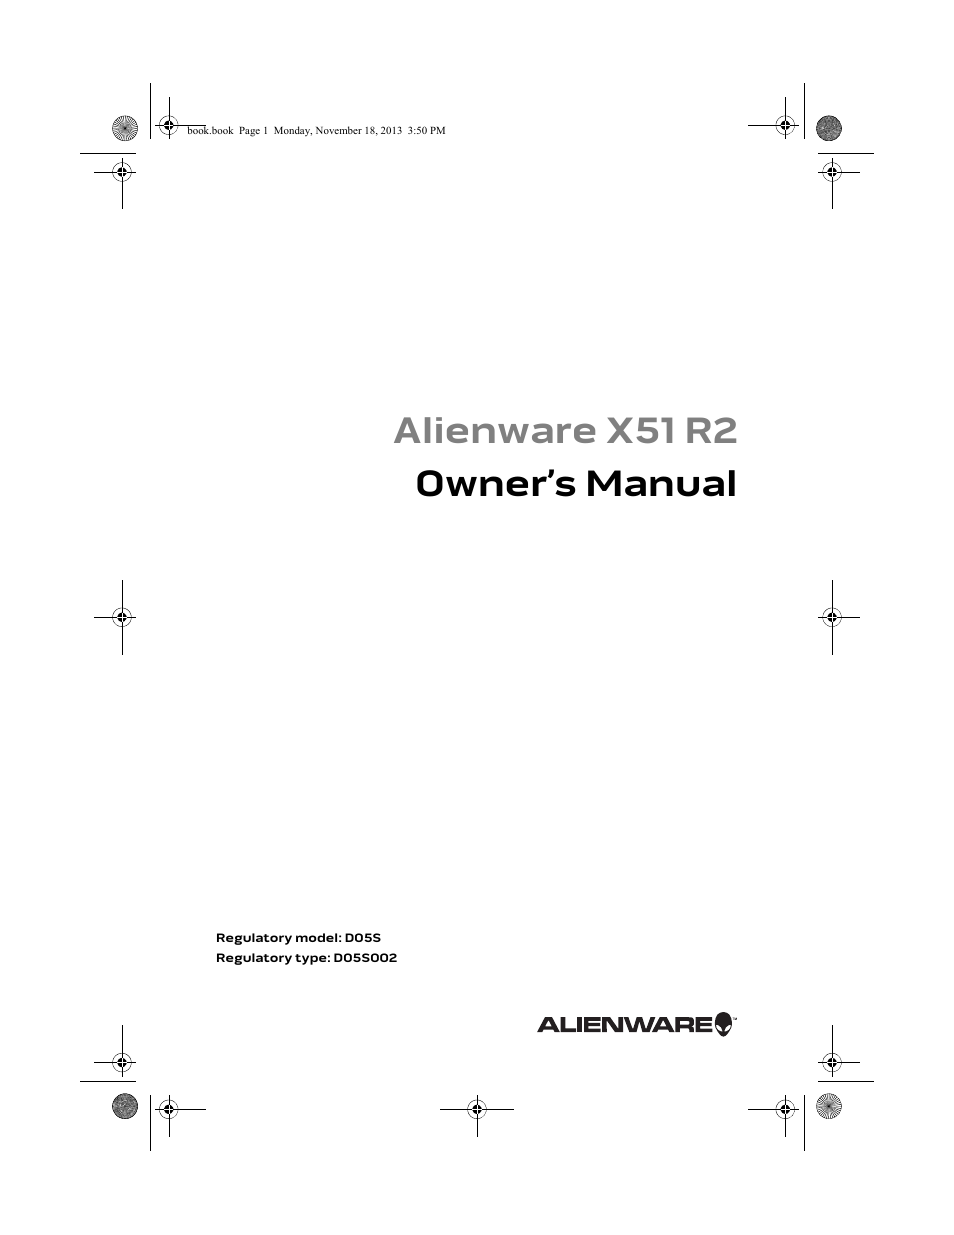 Dell Alienware X51 R2 (Early 2013) User Manual | 18 pages